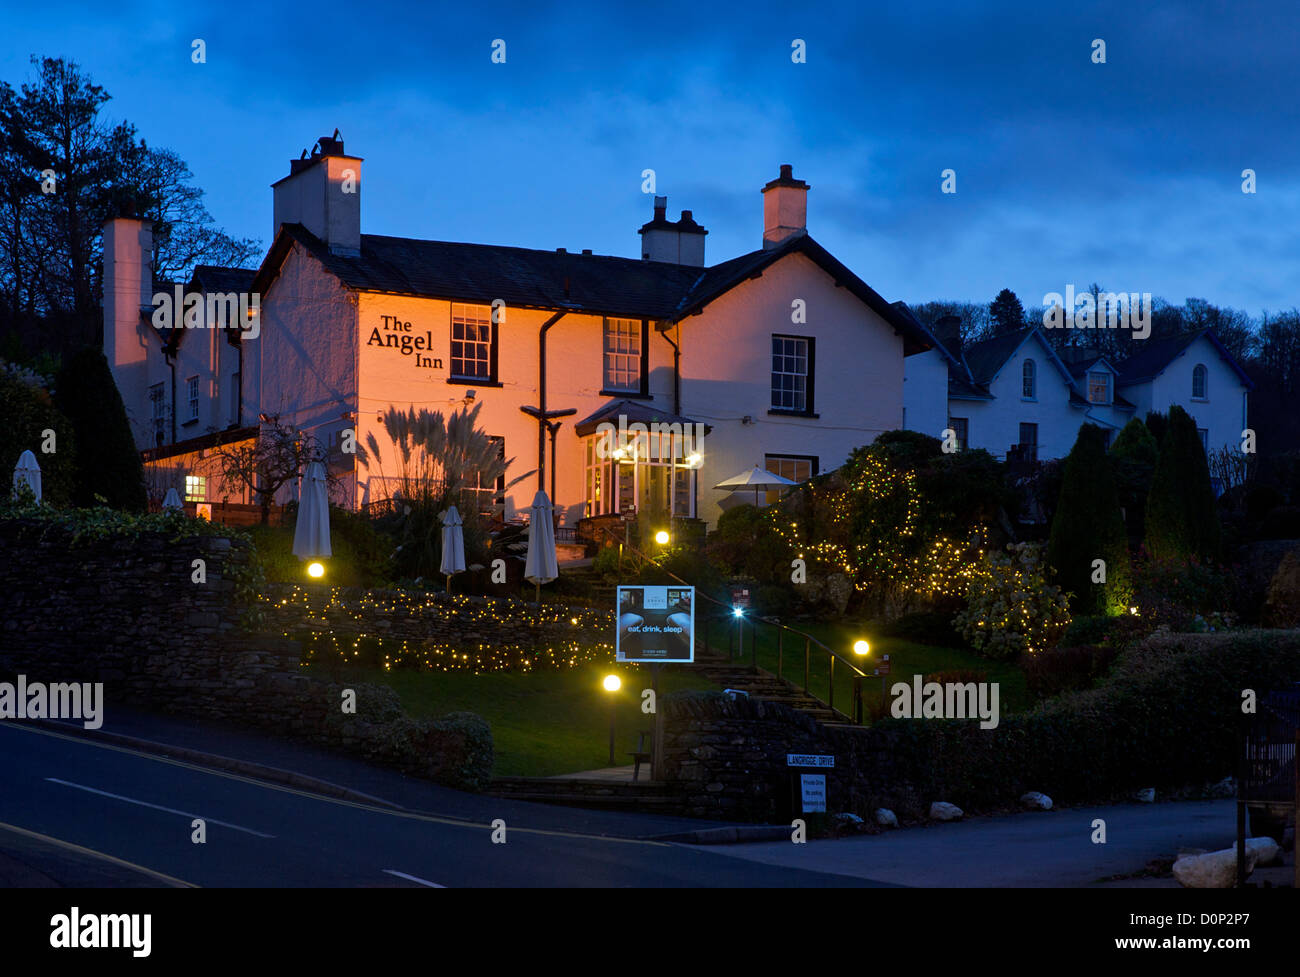 The Angel Inn at night, Bowness, Lake District National Park, Cumbria, England UK Stock Photo